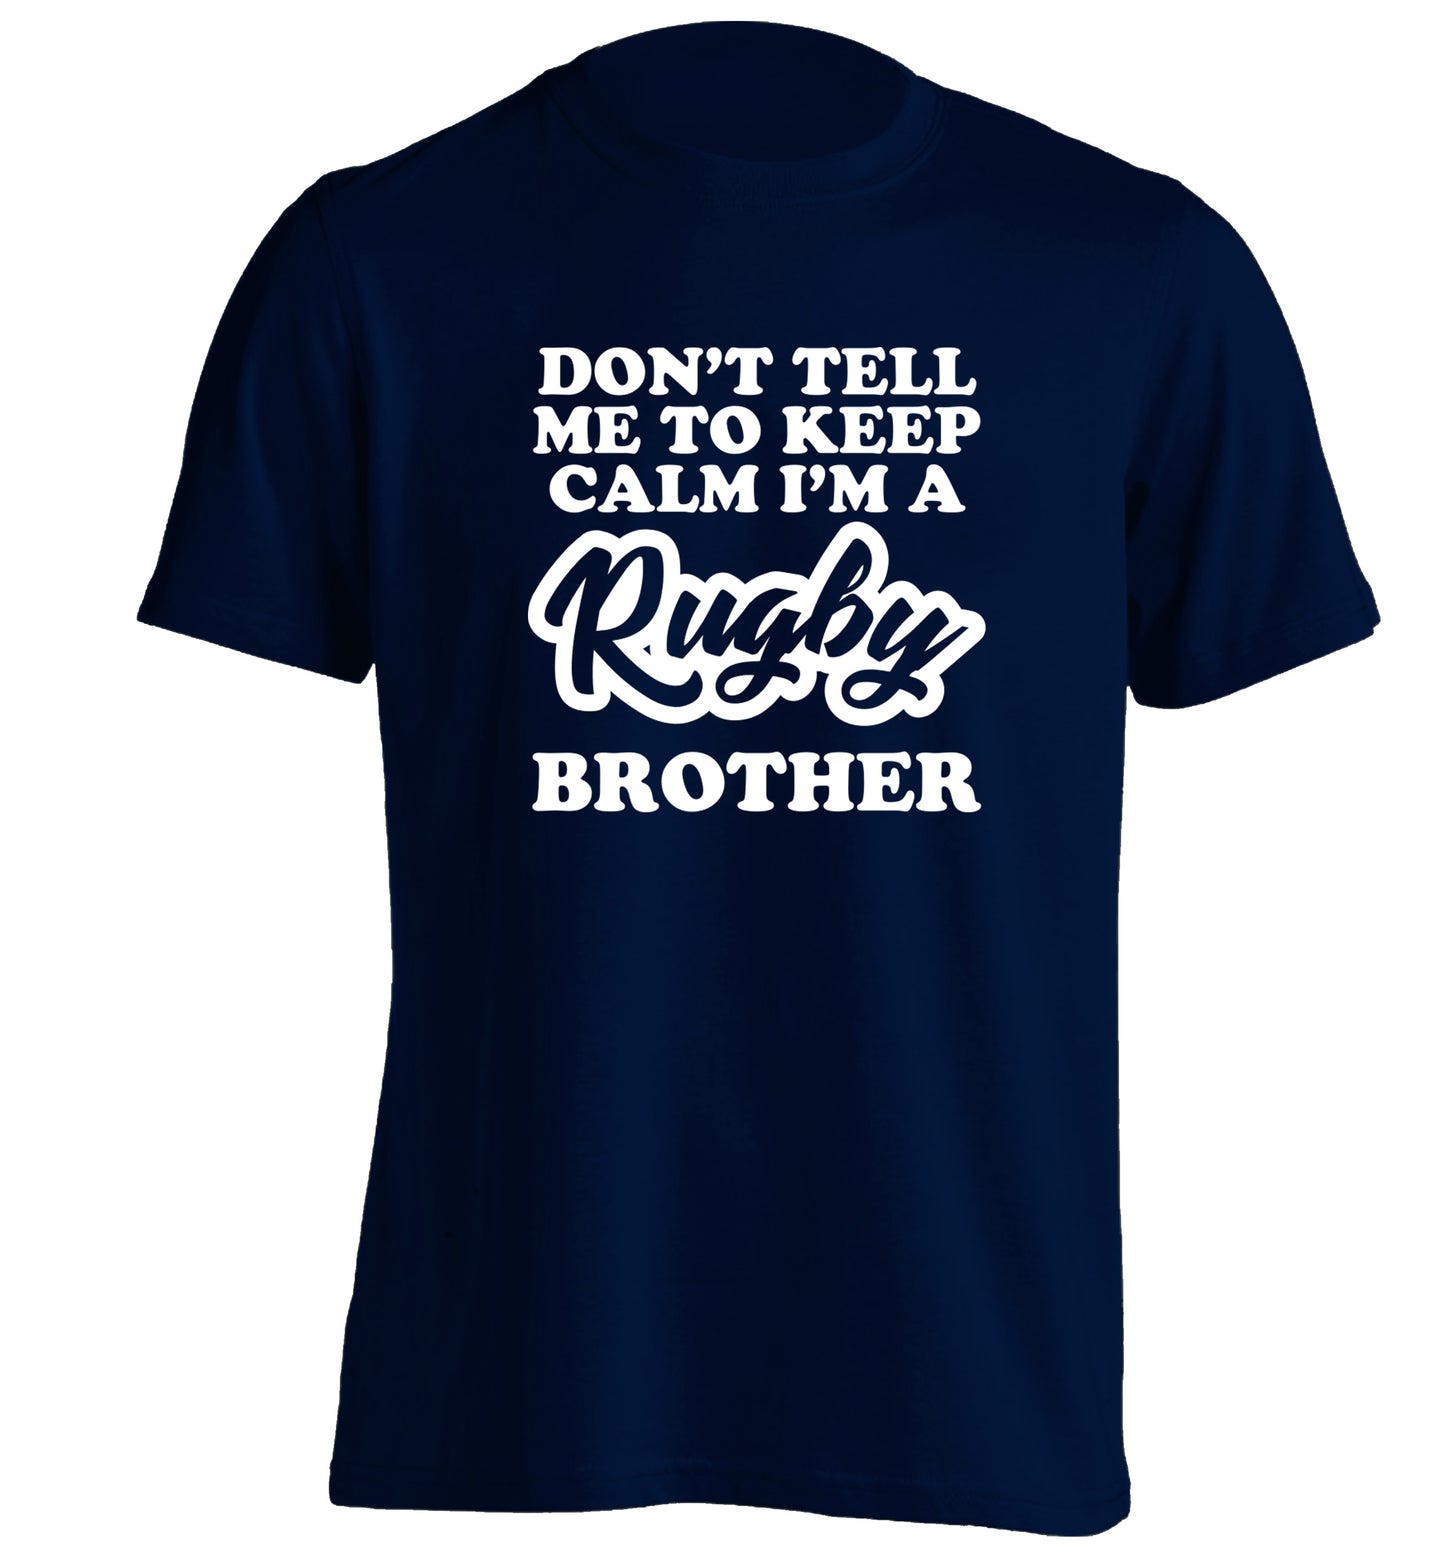 Don't tell me keep calm I'm a rugby brother adults unisex navy Tshirt 2XL